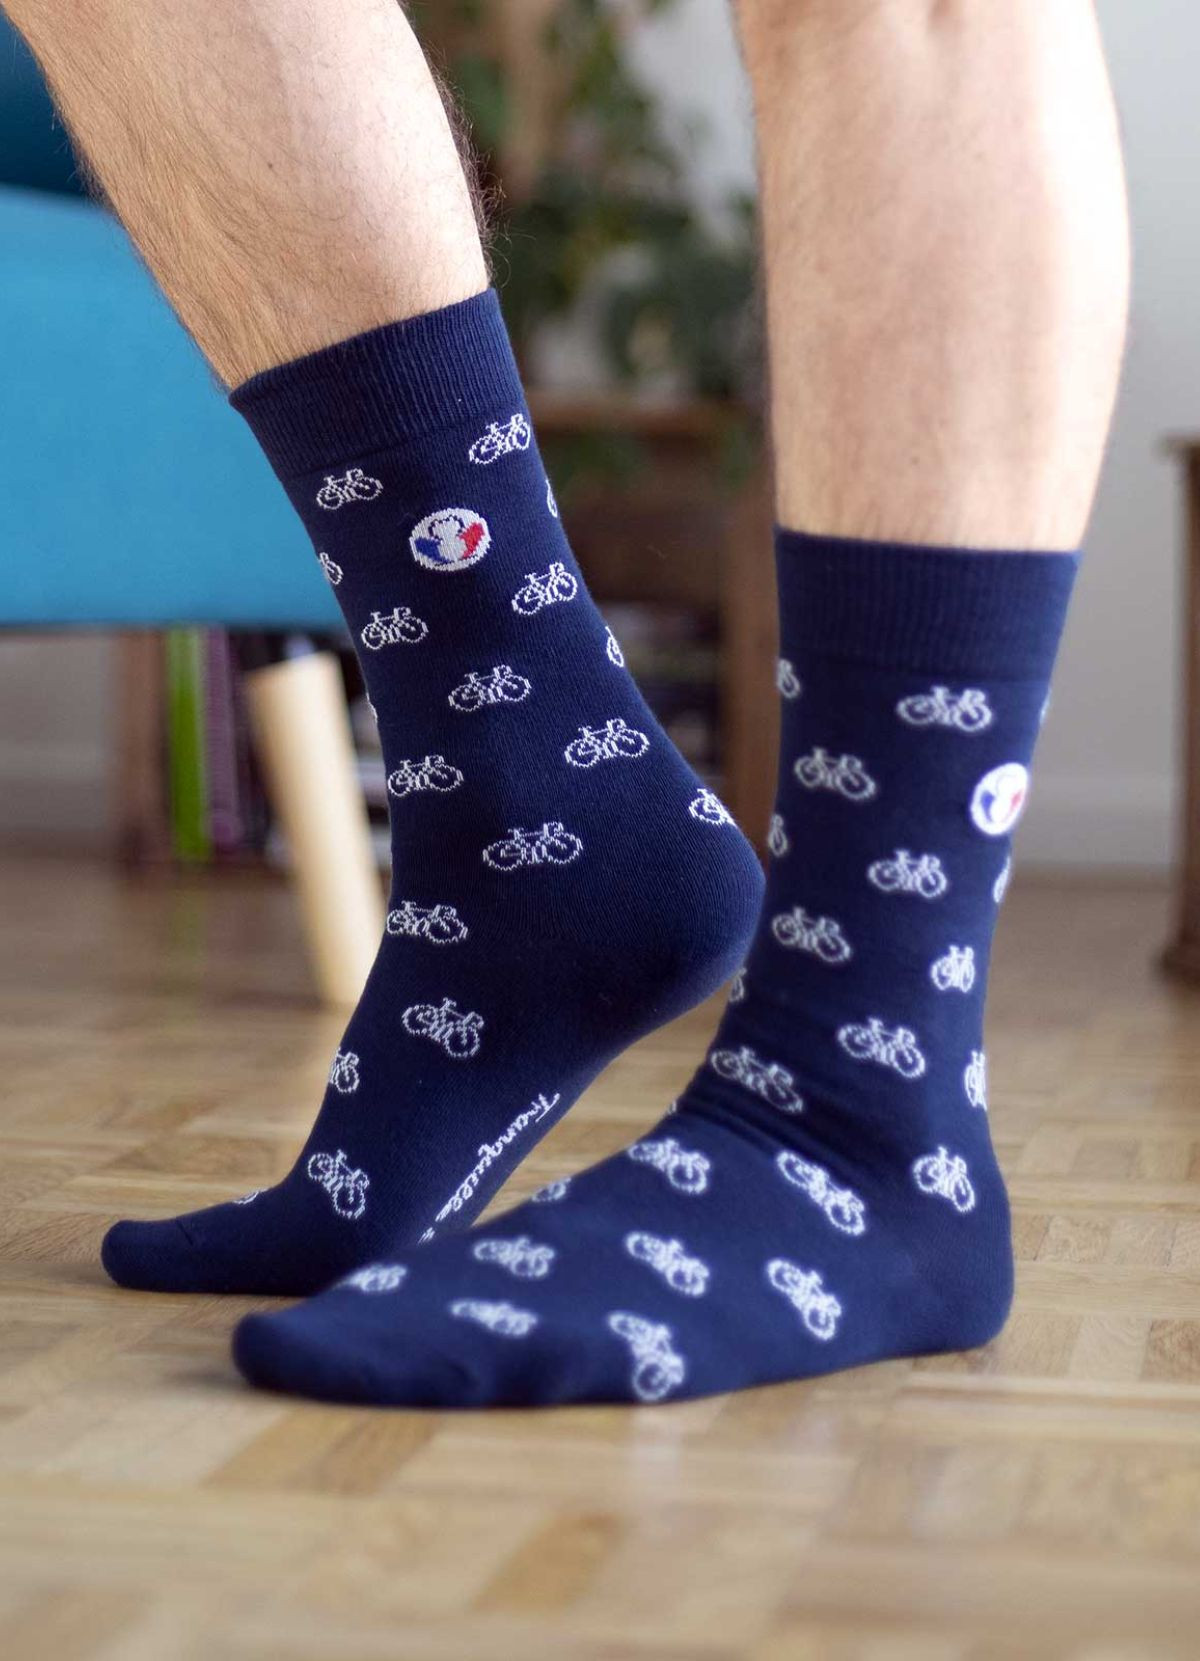 Chaussettes Homme Fantaisie, Made in France